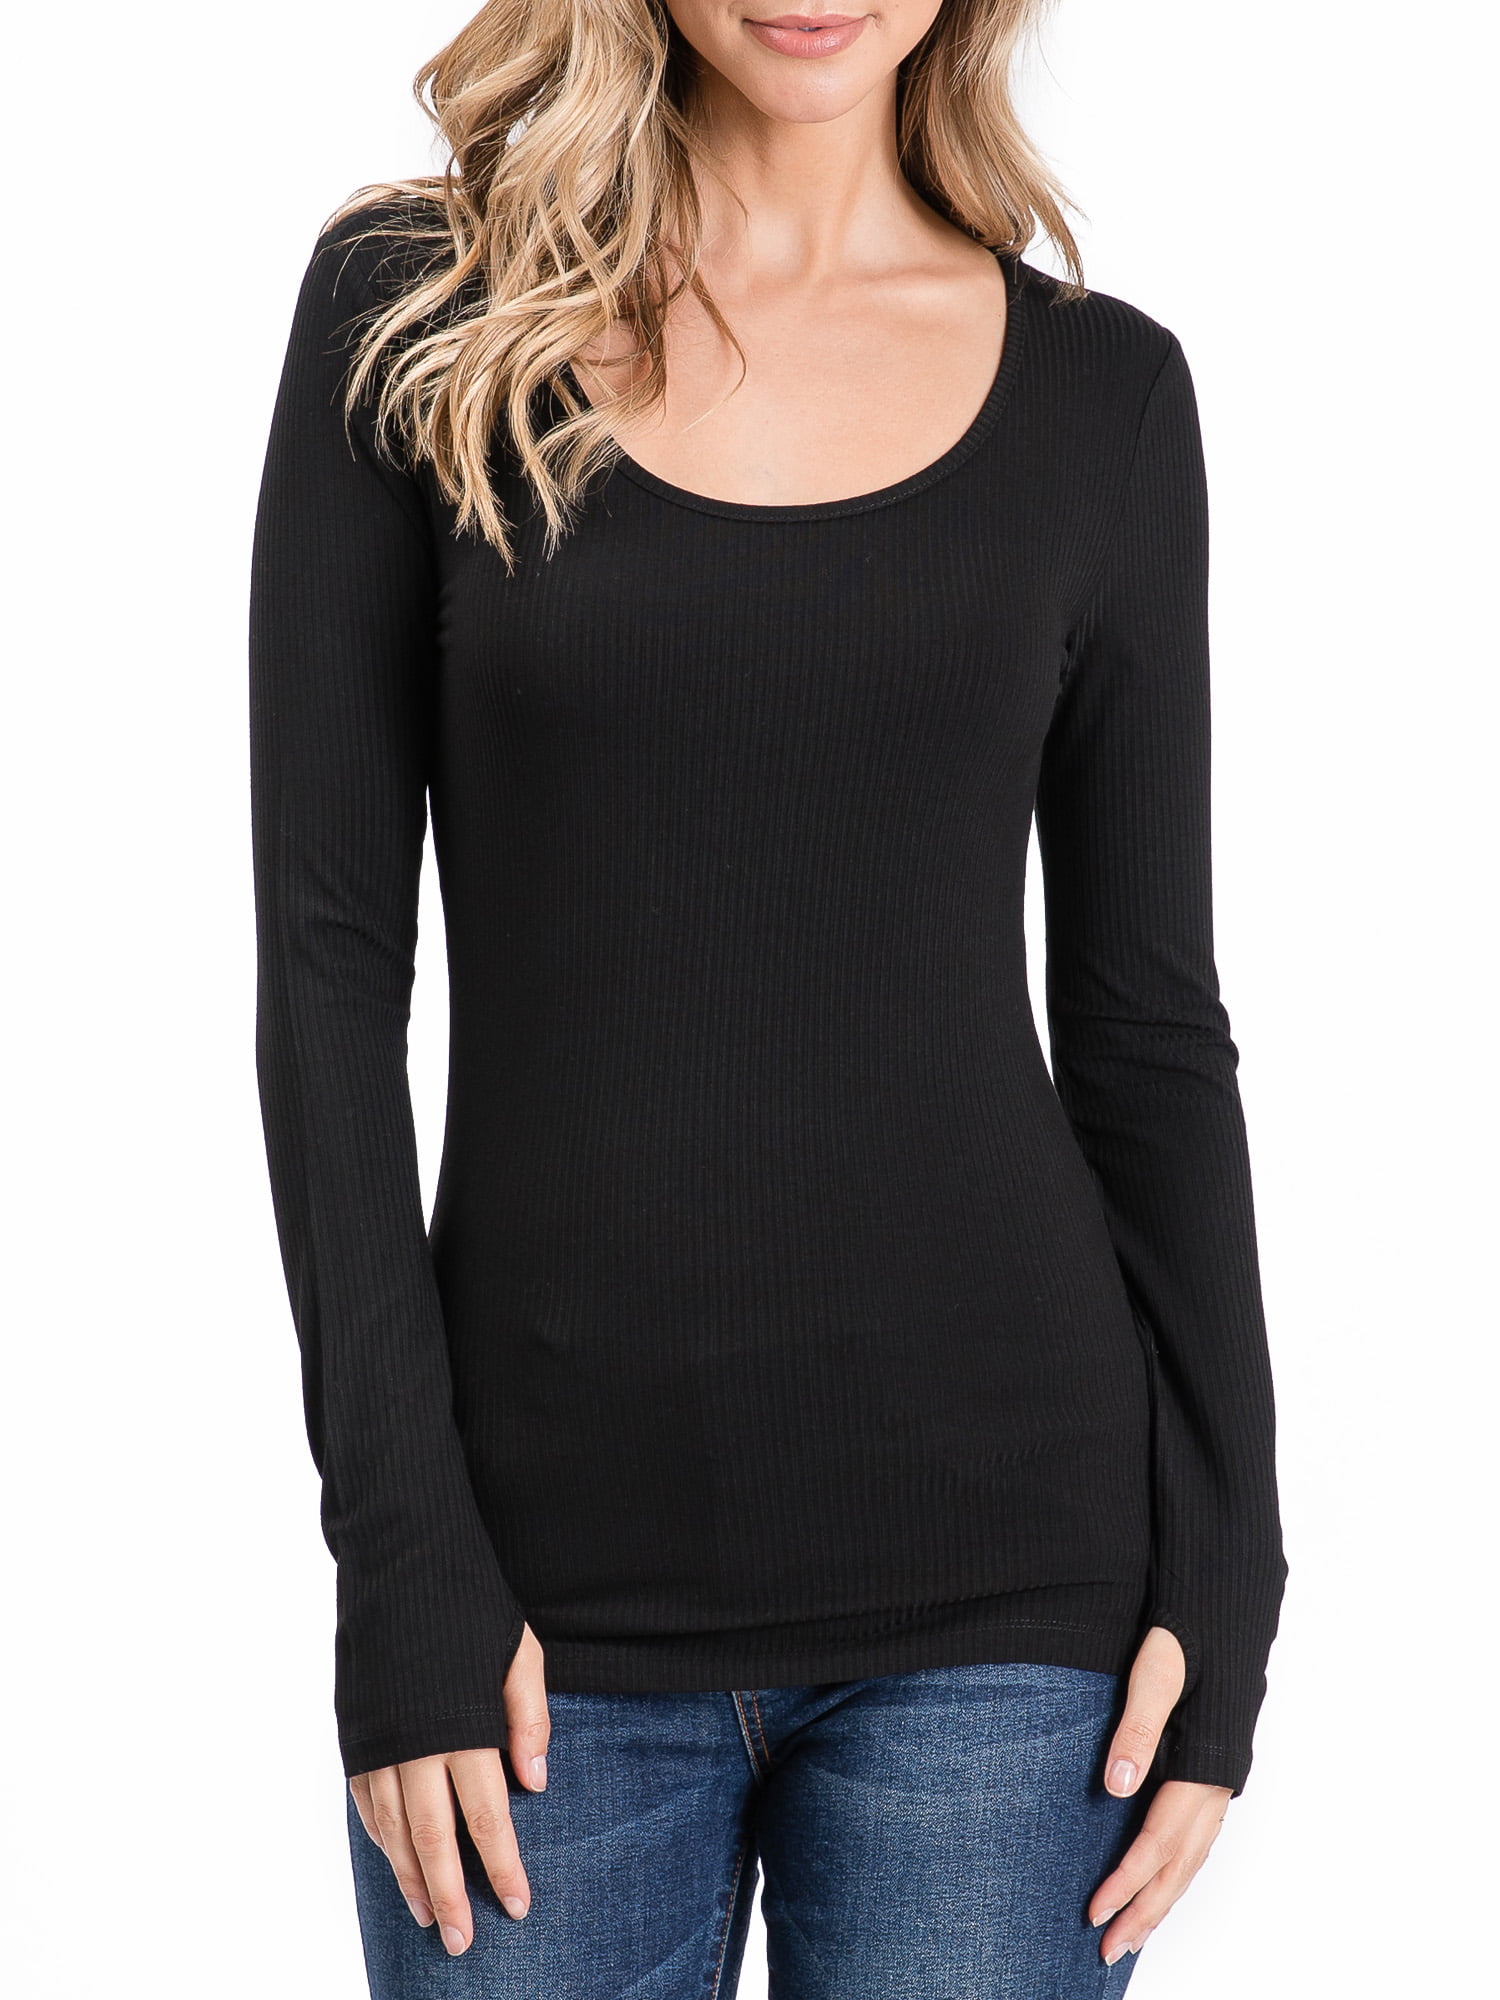 Doublju Women's Round Neck Long Sleeve Ribbed Top with Thumb Holes